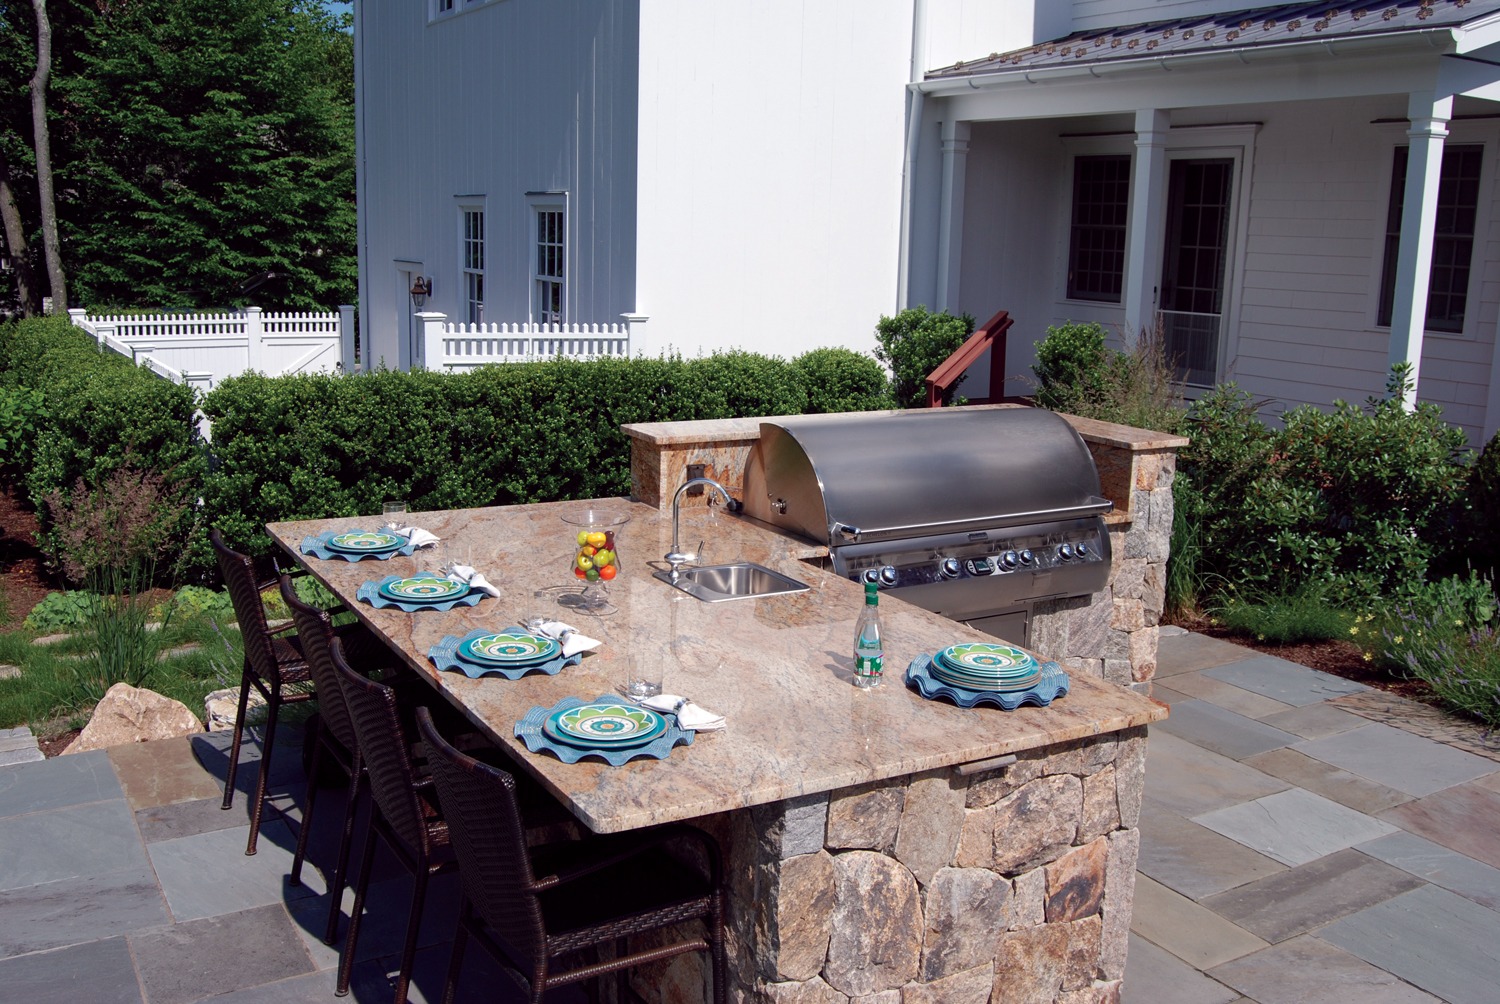 An outdoor kitchen with a built-in grill, sink, and stone countertop. Plates are set on the bar, and there's a white fence with greenery behind.